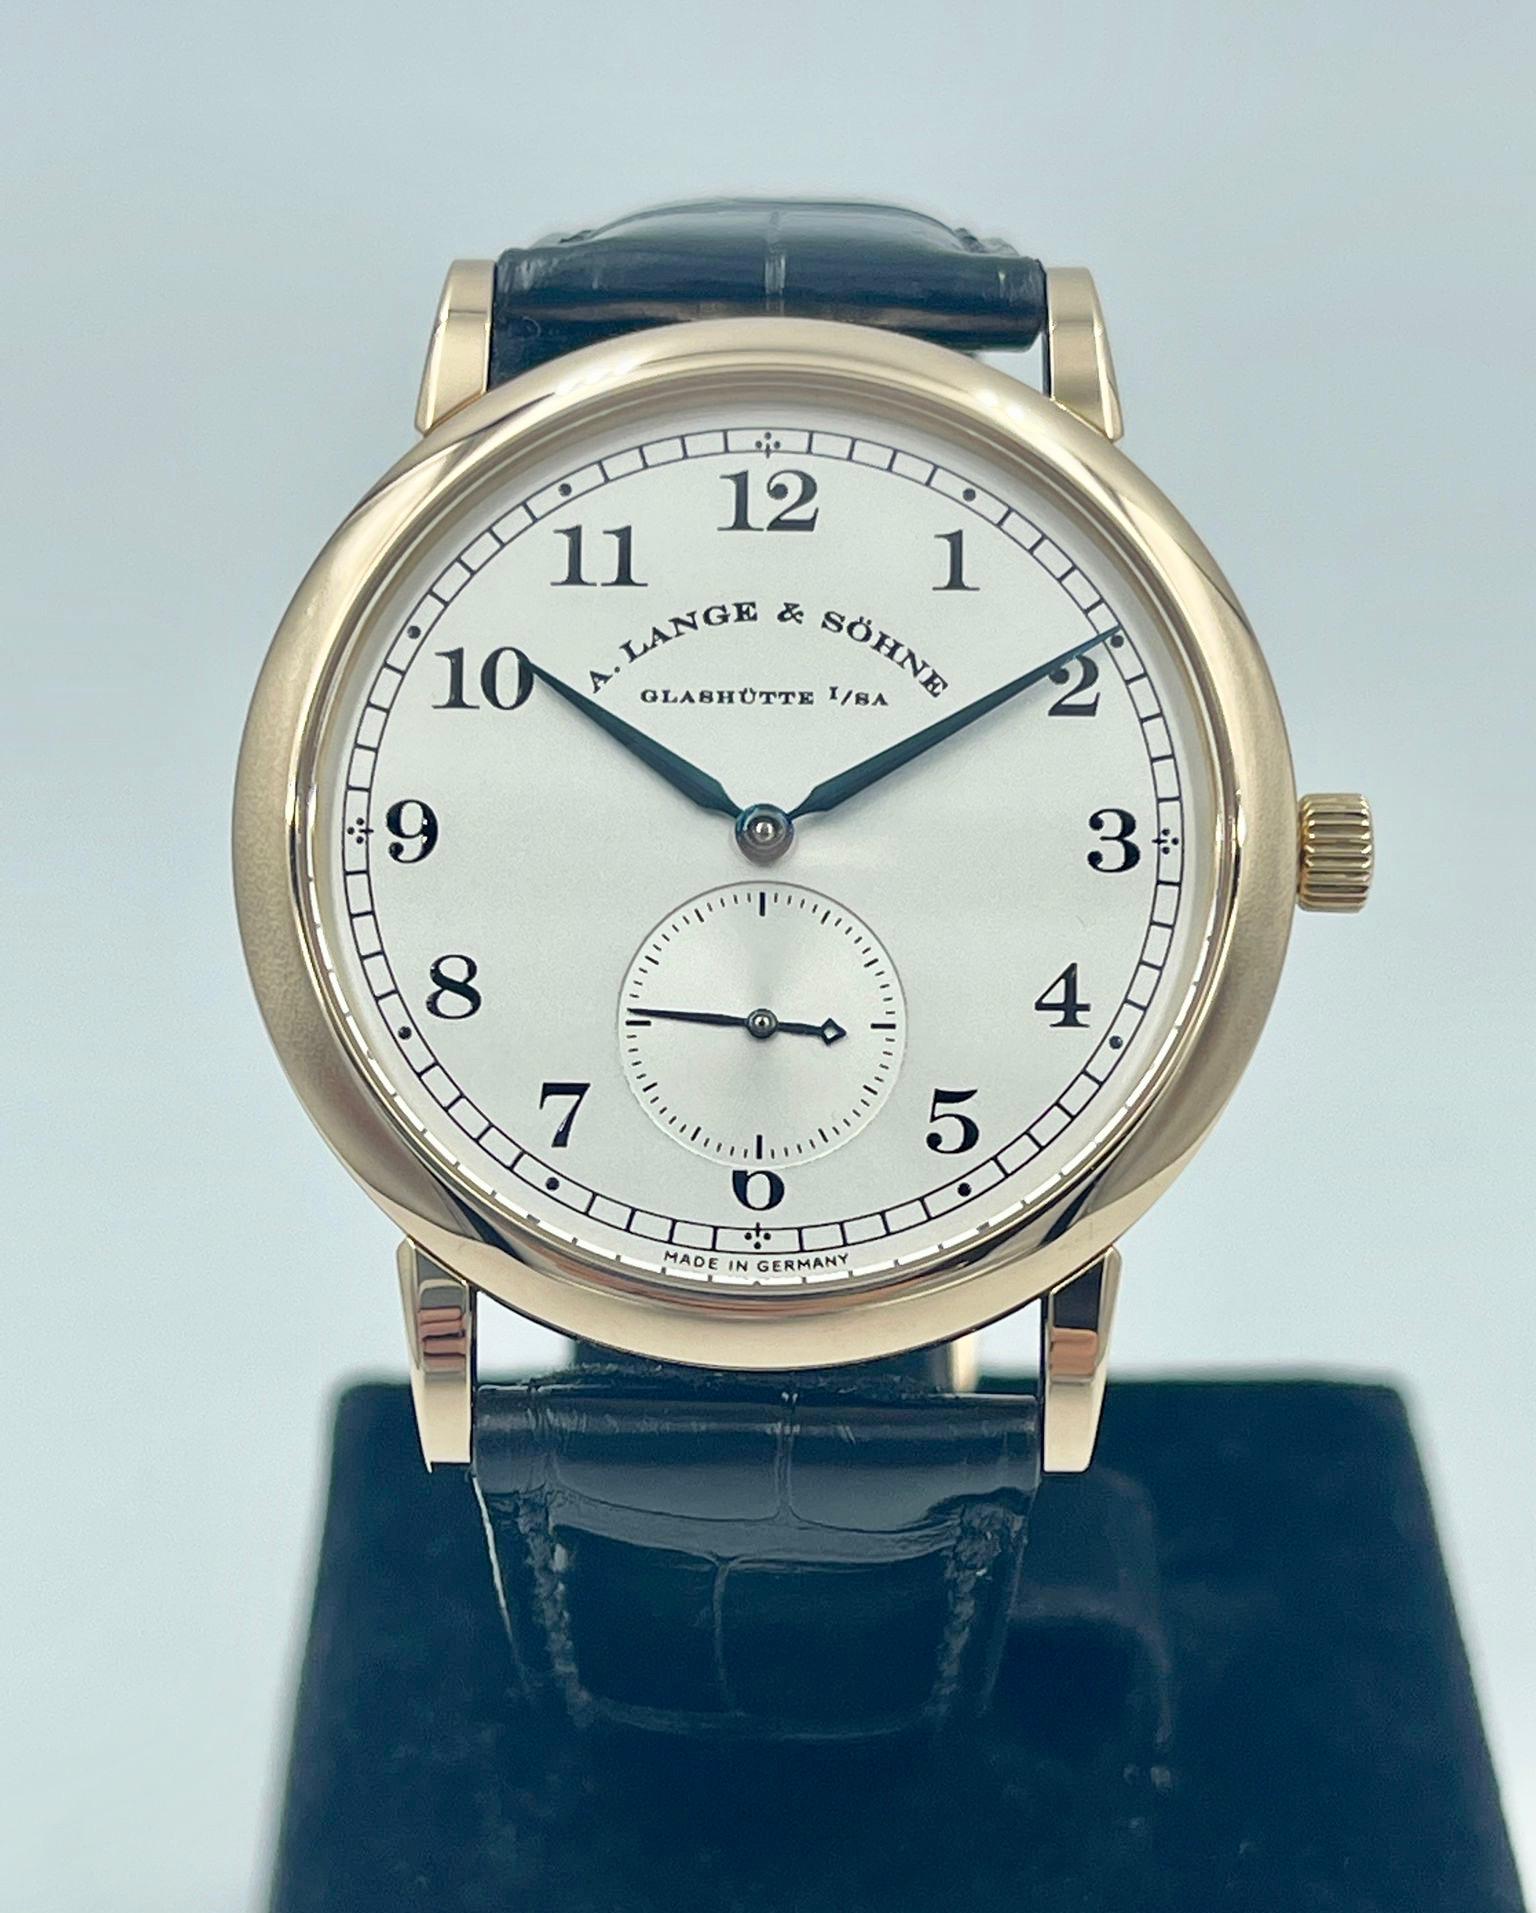 A.Lange & Sohne 1815, Reference 206.021, Gold Watch 7